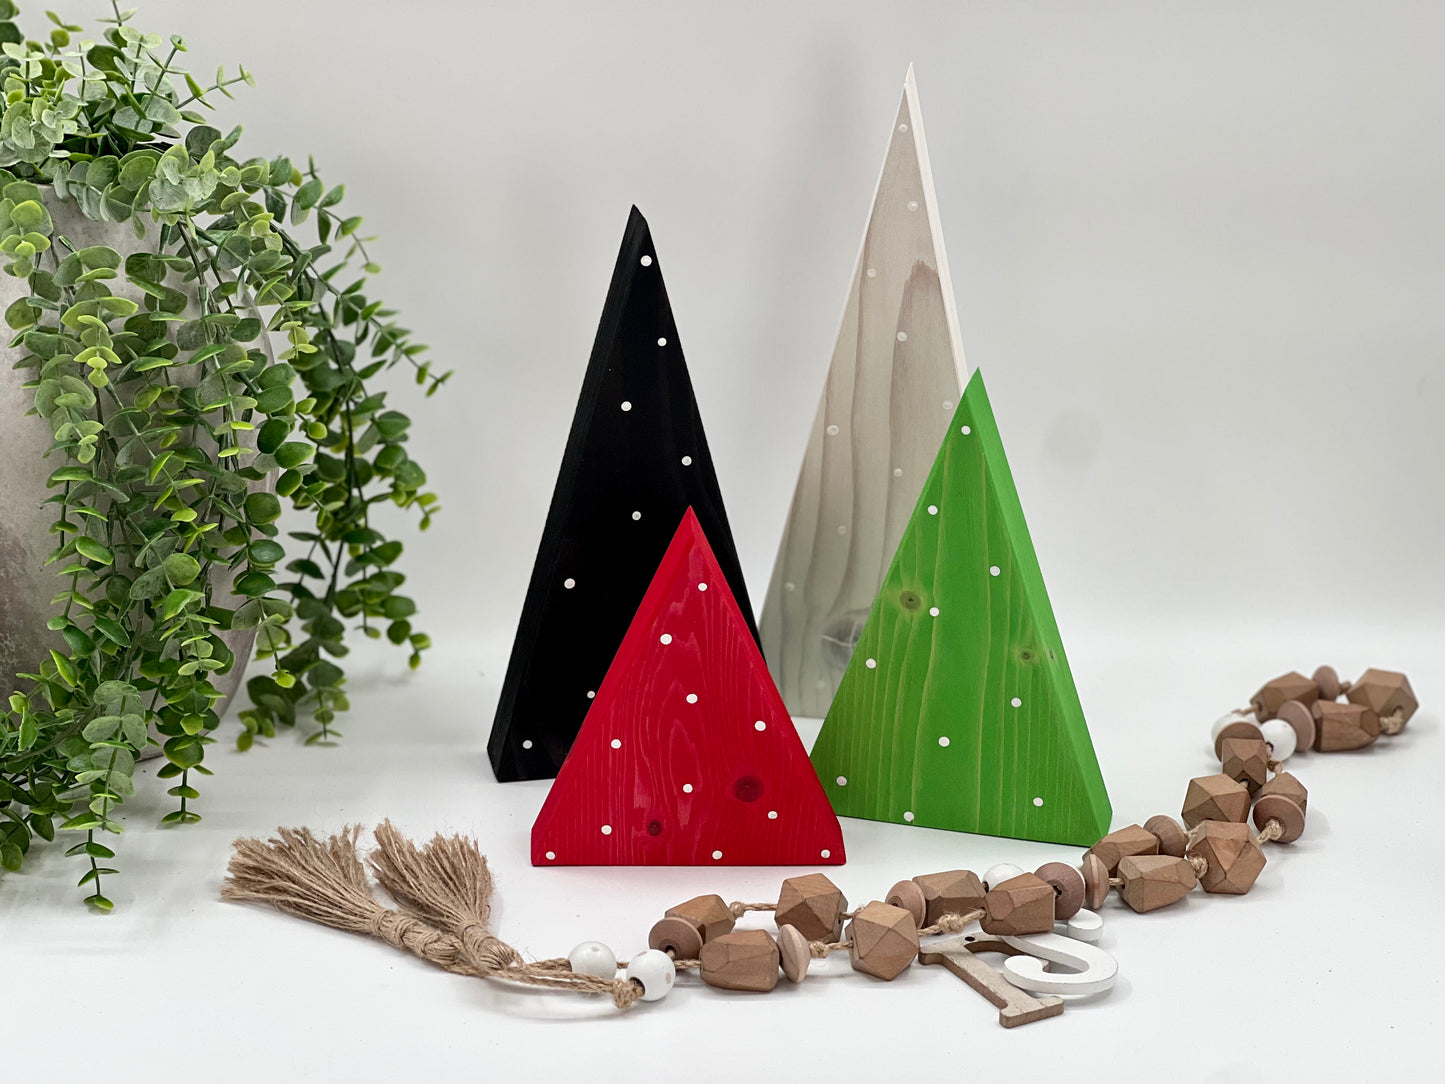 Painted Triangle Trees